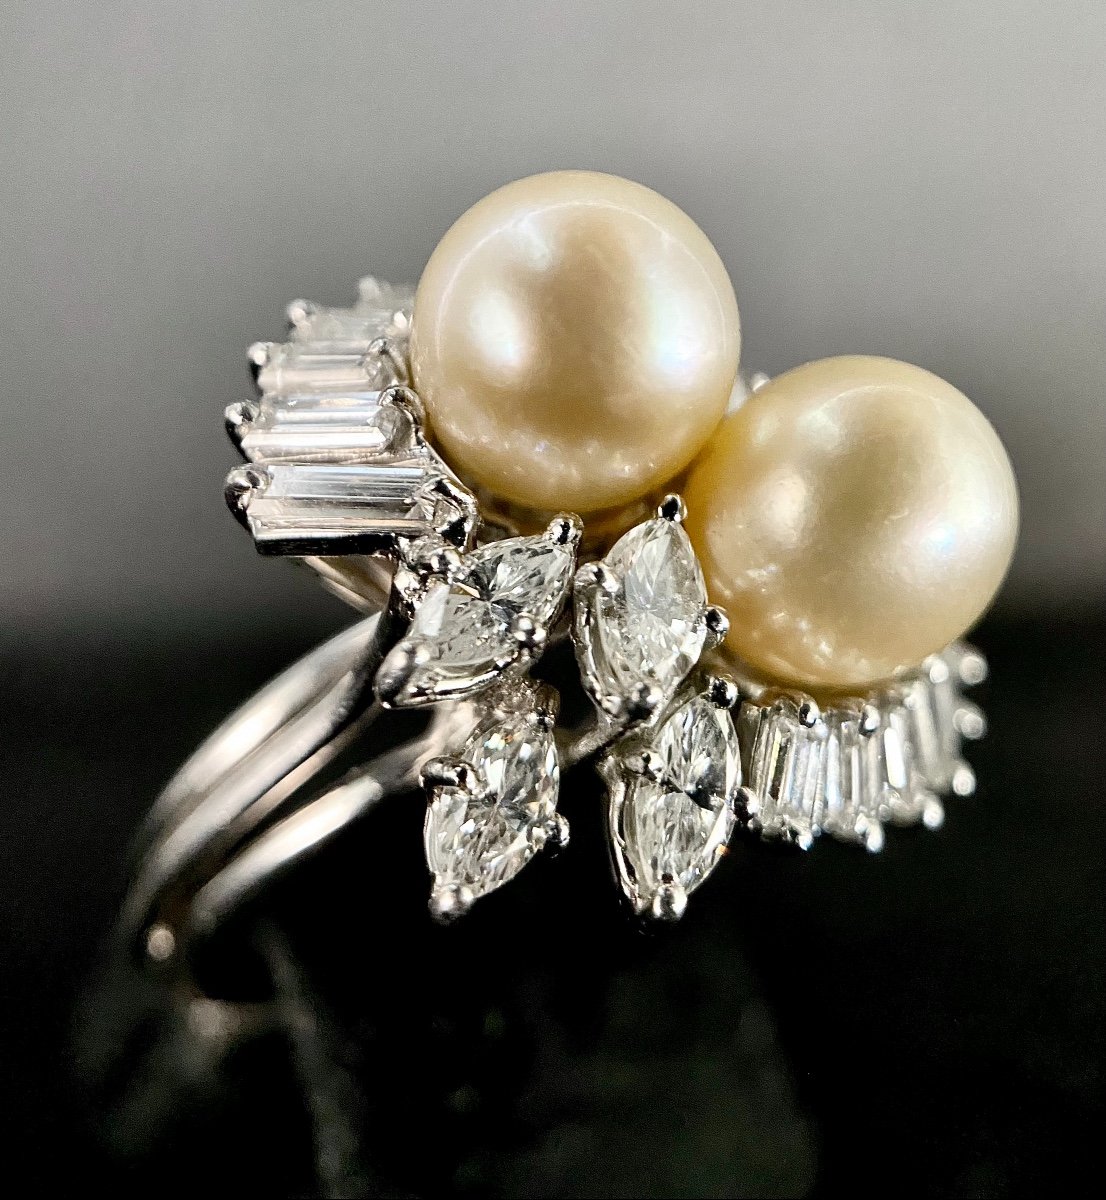 Ring In White Gold Set With 2 Pearls Surrounded By 22 Diamonds: 3.50 Carats-photo-2